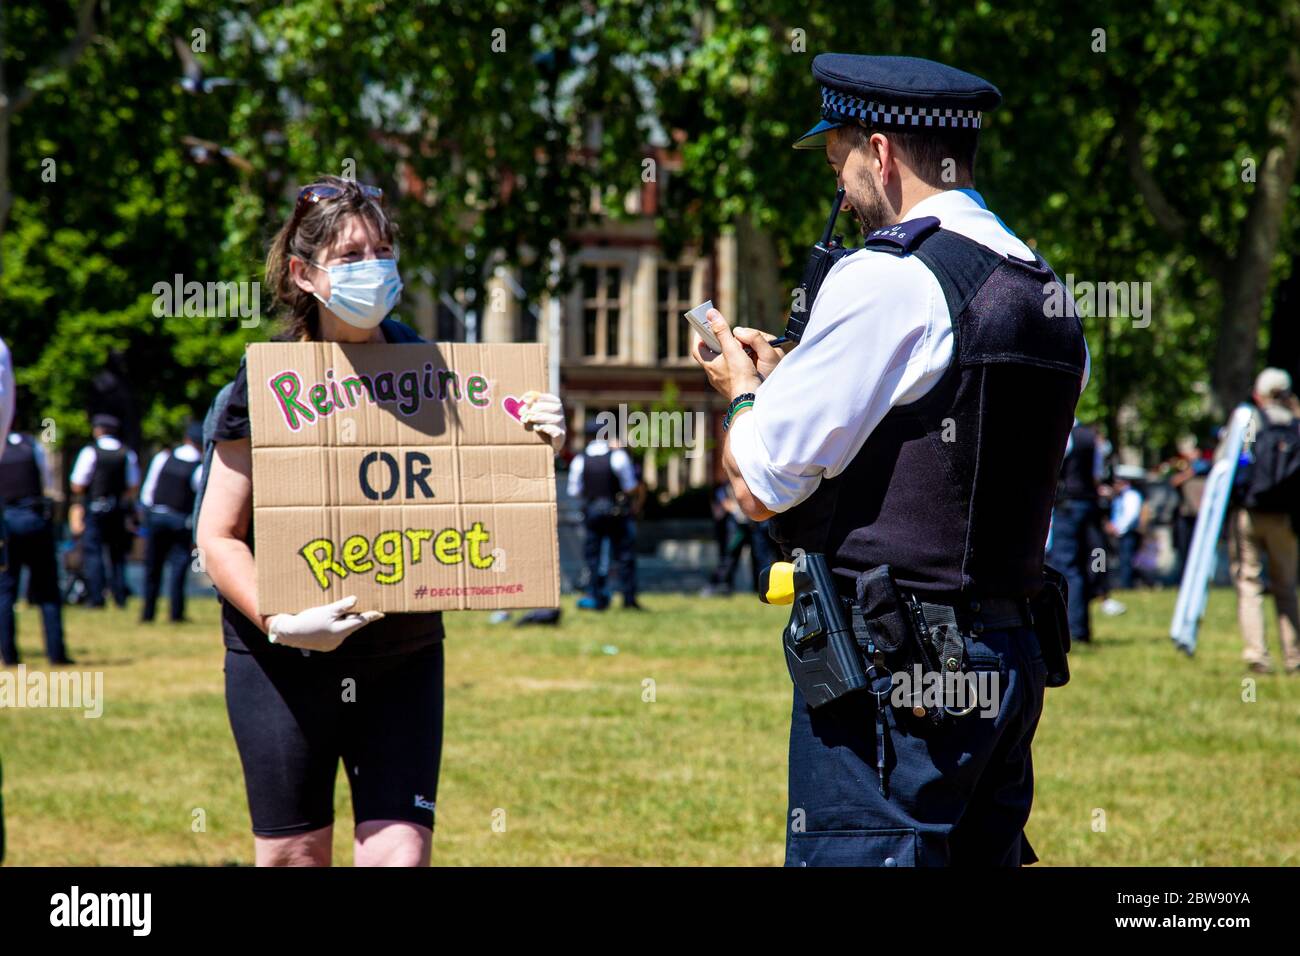 30 May 2020 London, UK - Extinction Rebellion stage silent socially-distanced climate change protest in Westminster, protesters being fined and taken away by police for breaching coronavirus regulations, police office writing a fine ticket to a woman holding a sign 'Reimagine or Regret' Stock Photo